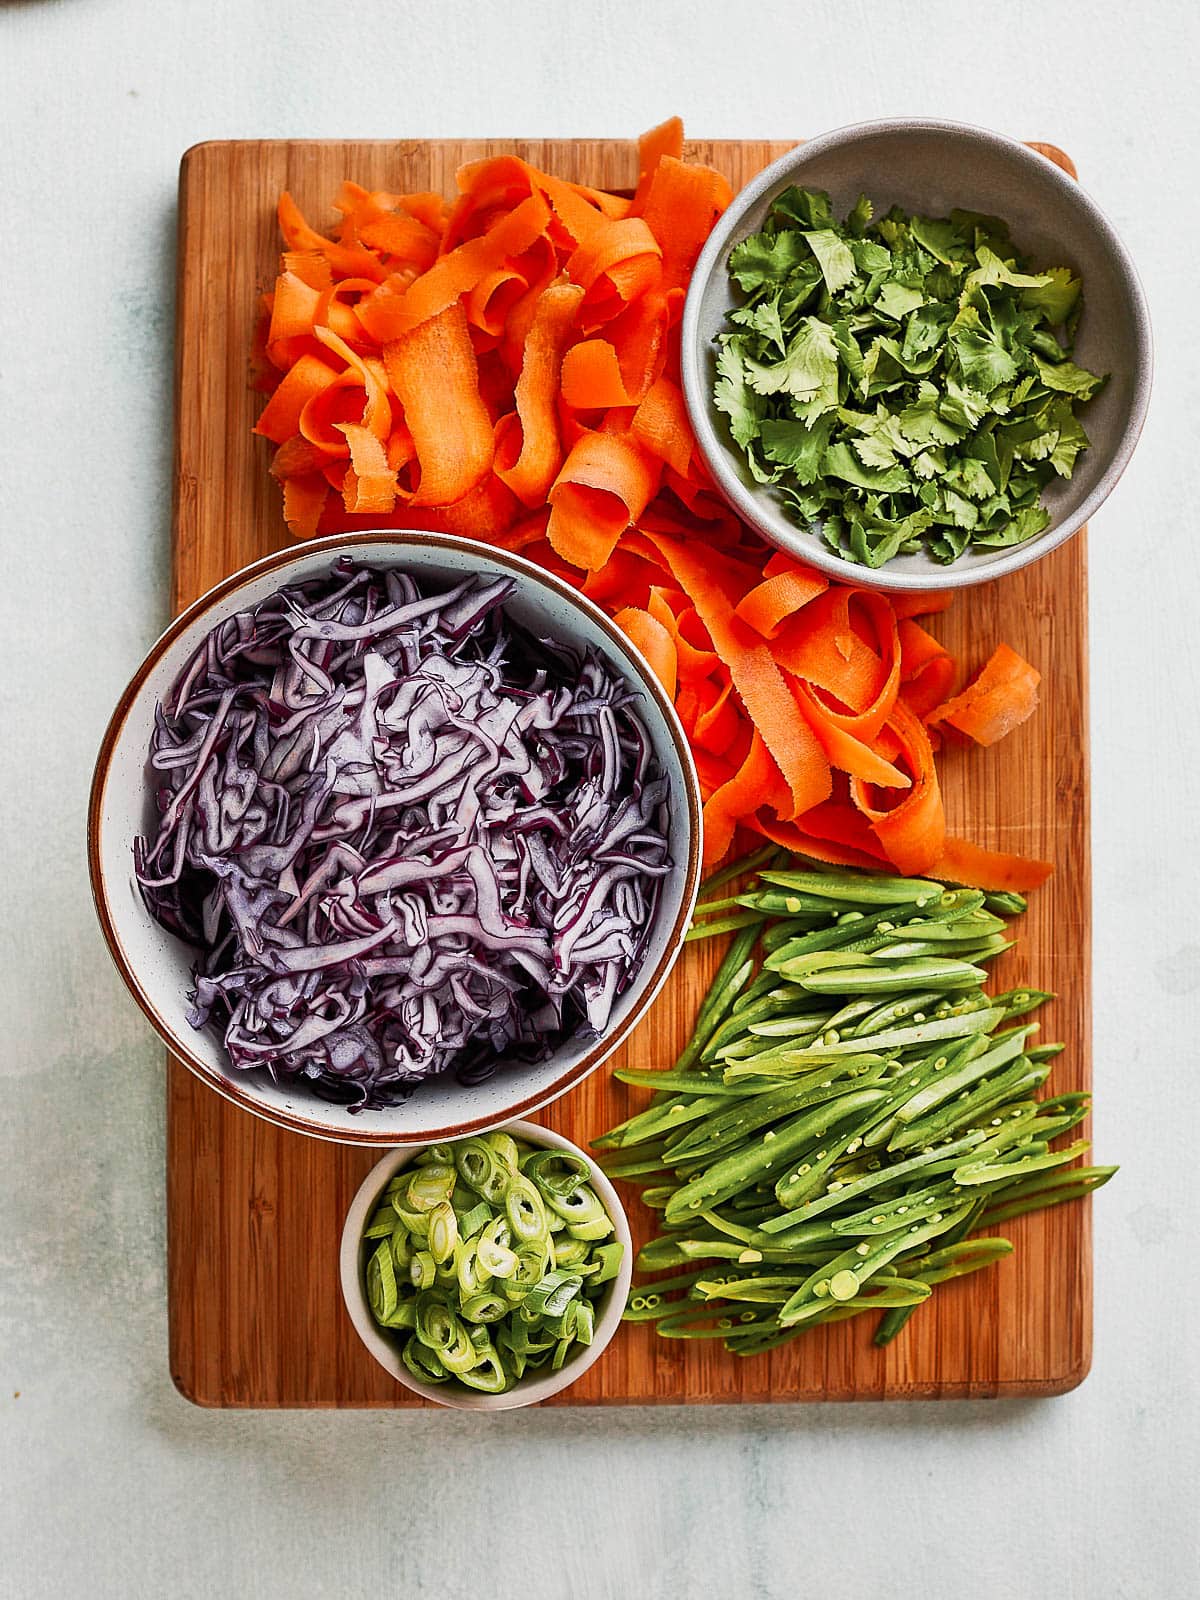 Shredded and chopped carrot, spring onion, cilantro, red cabbage and mangetout on a chopping board